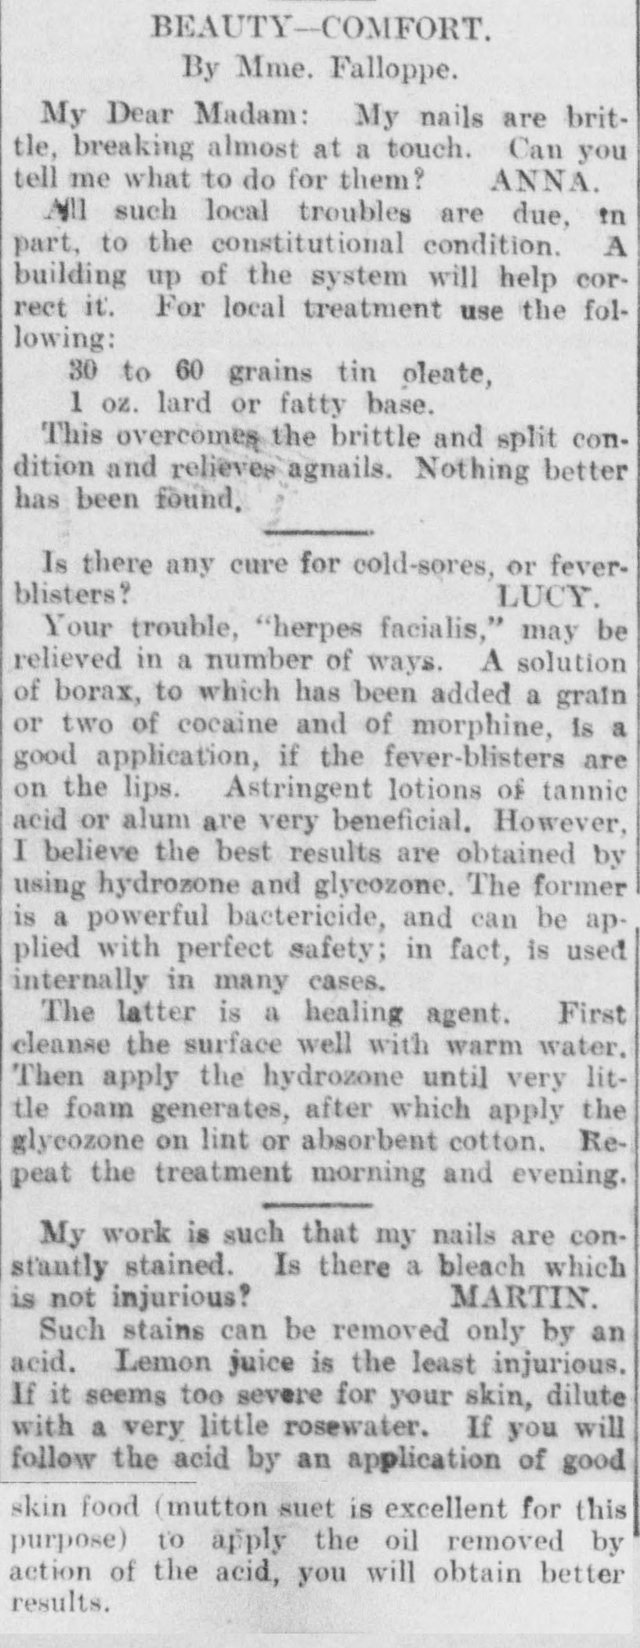 In this 1904 advice column from the Tacoma Times, "Madame Falloppe" recommended that cold sores be treated with a solution of borax, cocaine, and morphine.